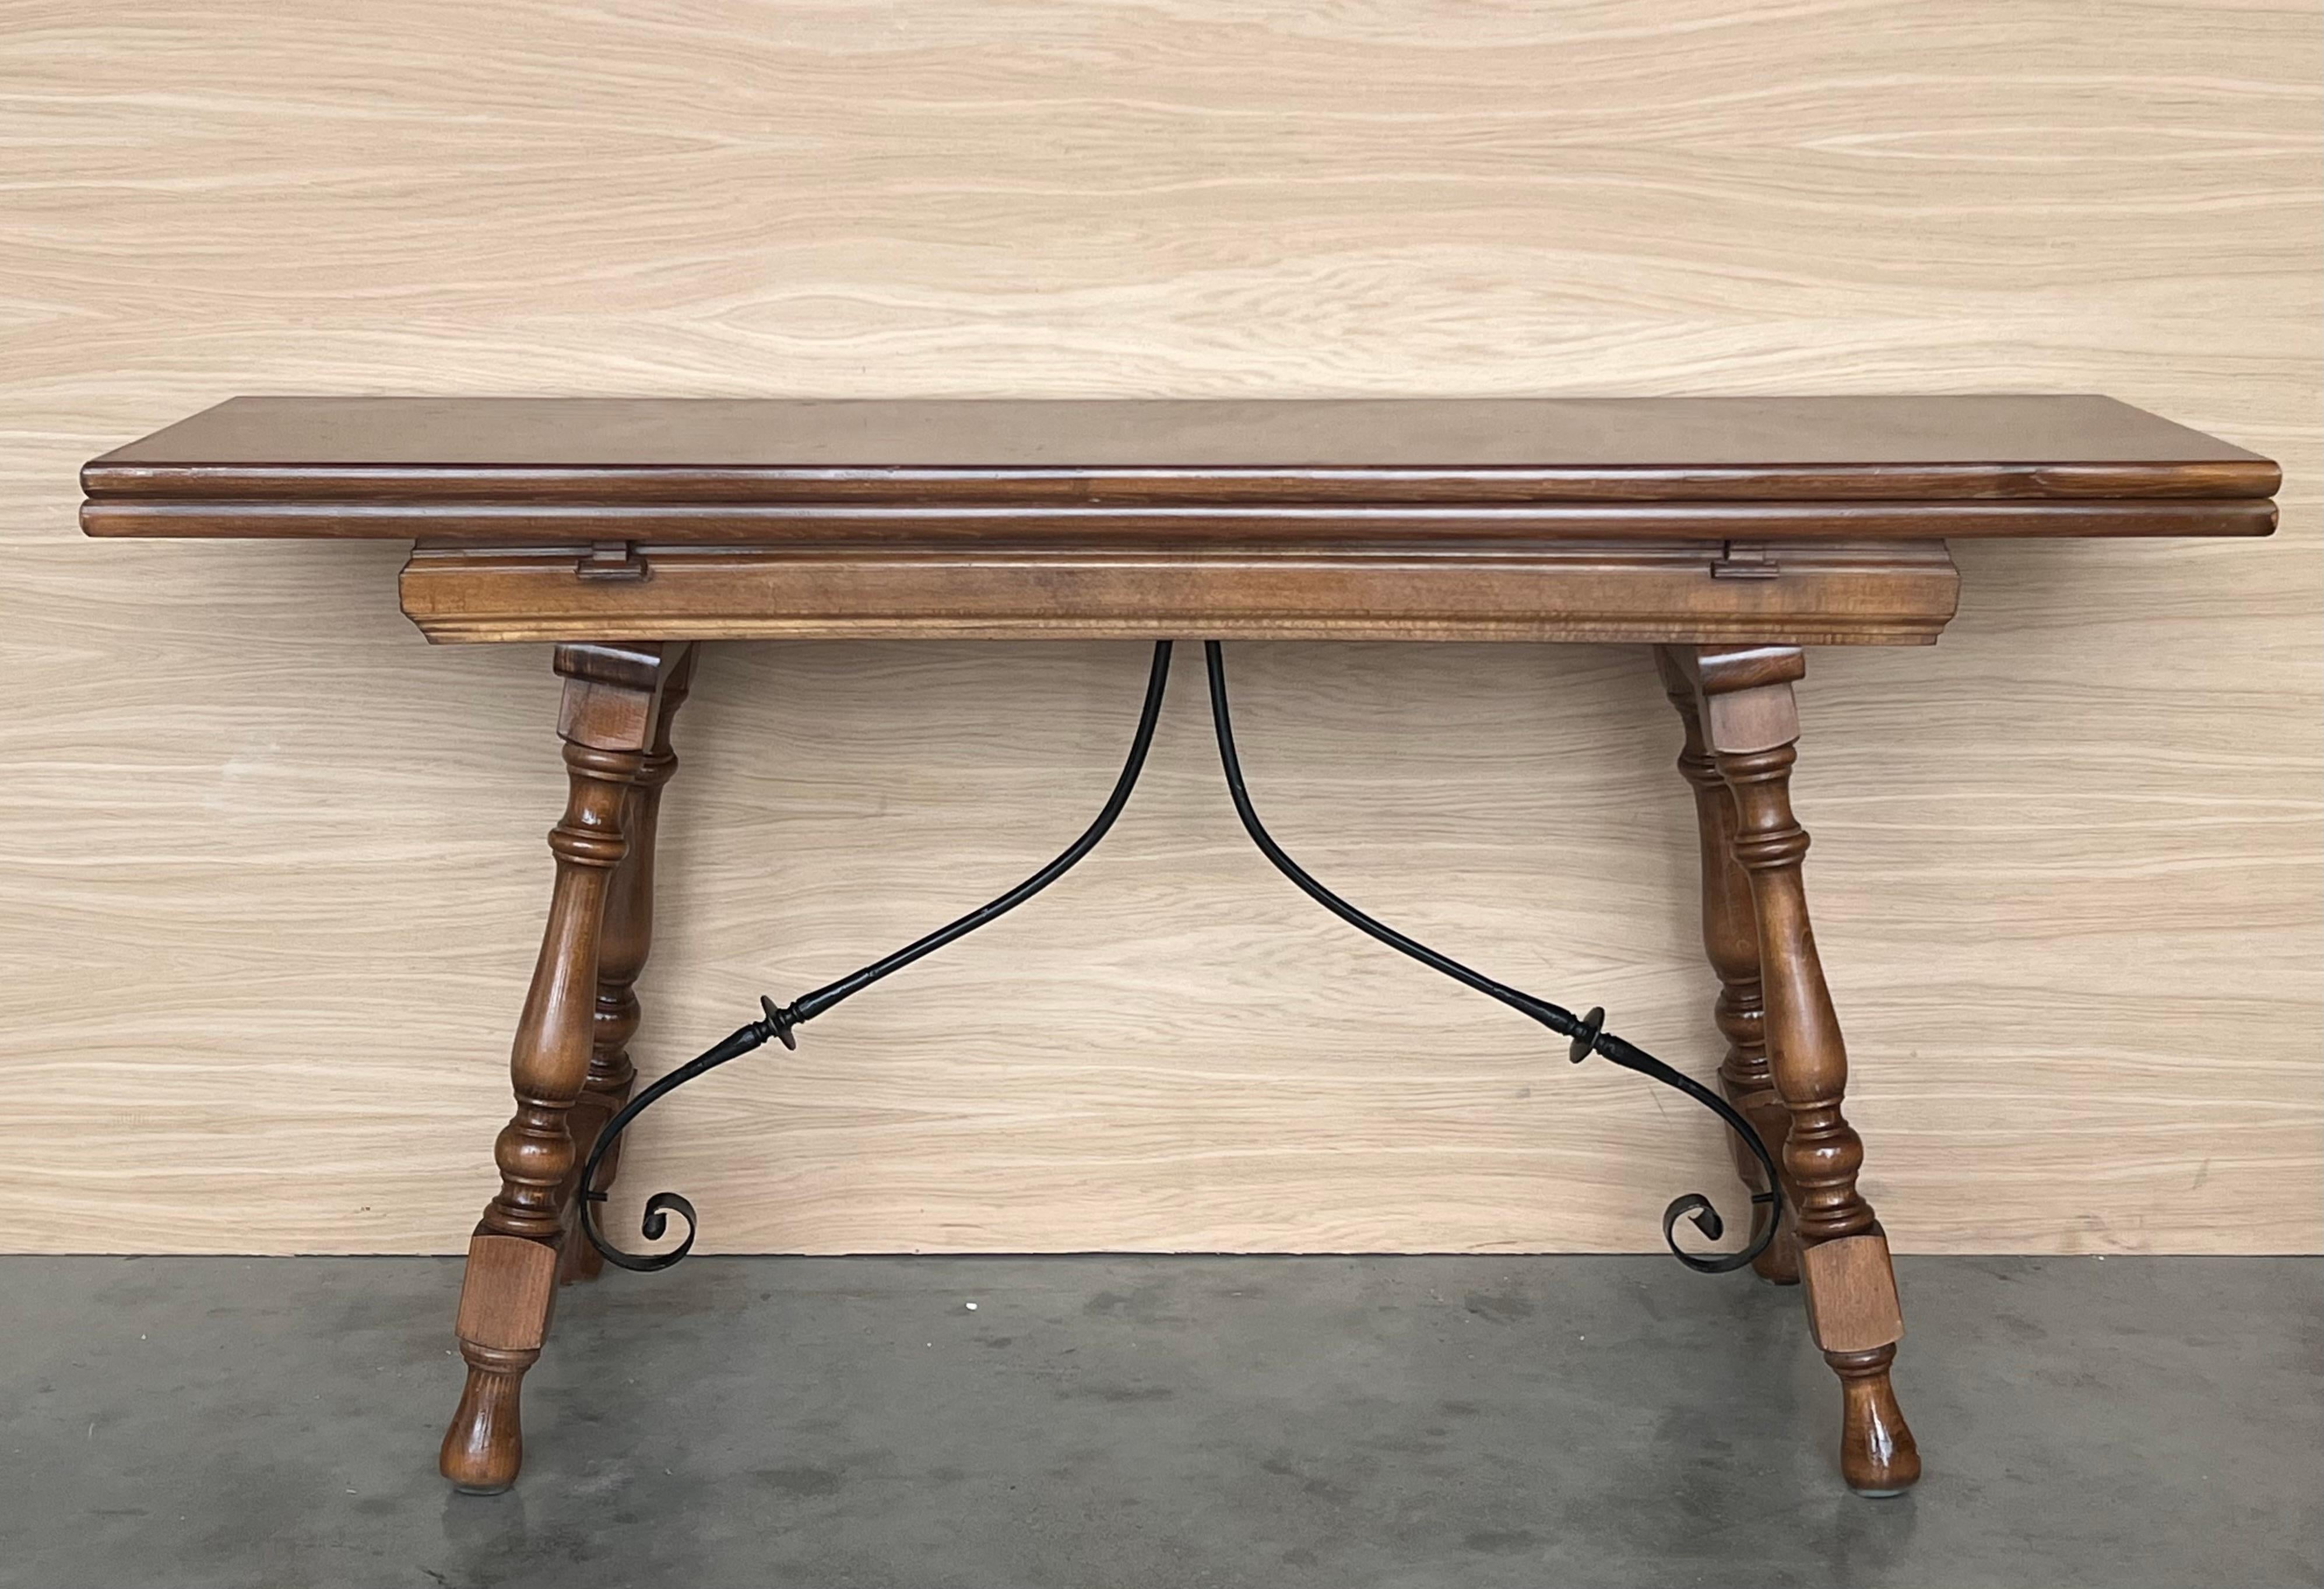 20th century Spanish console fold out farm table
Works as both a dining table and console.

Opened wide : 32in
From the floor to the bottom top table : 29.52in